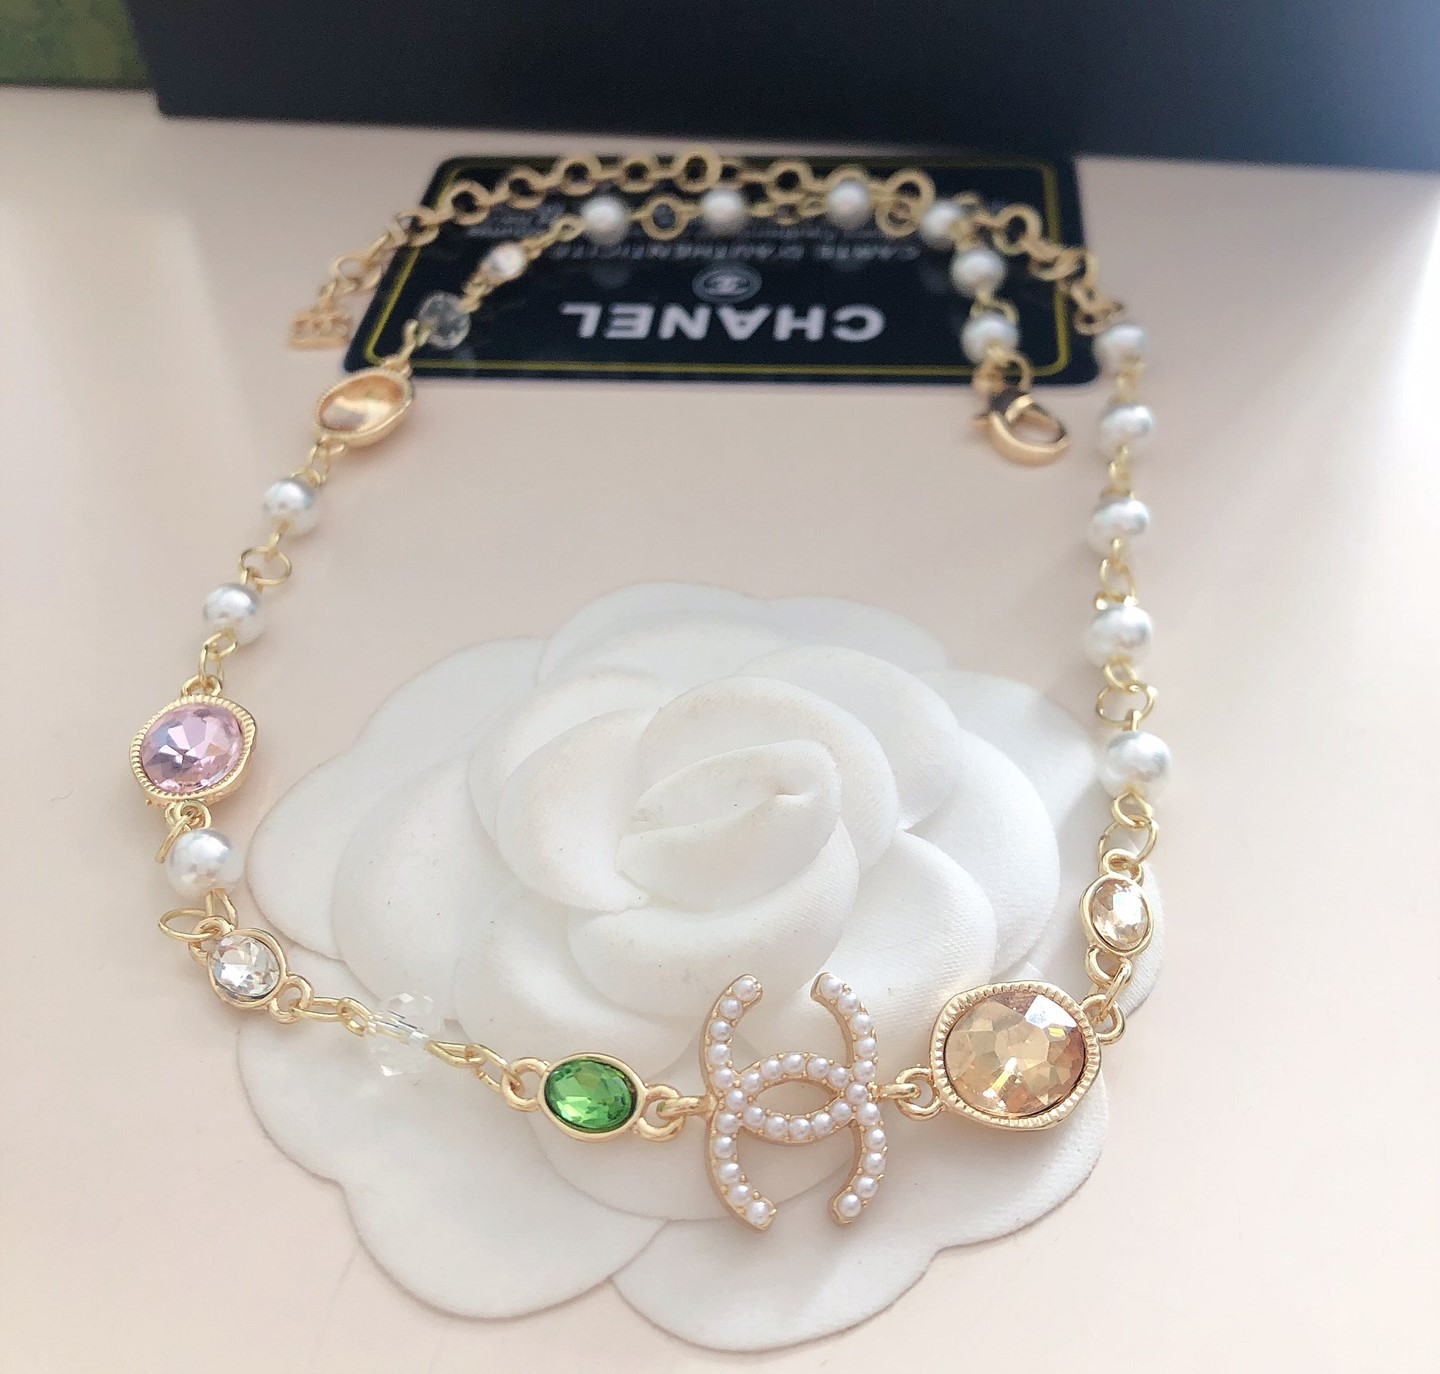 Chanel choker clorful crystal necklace 113910